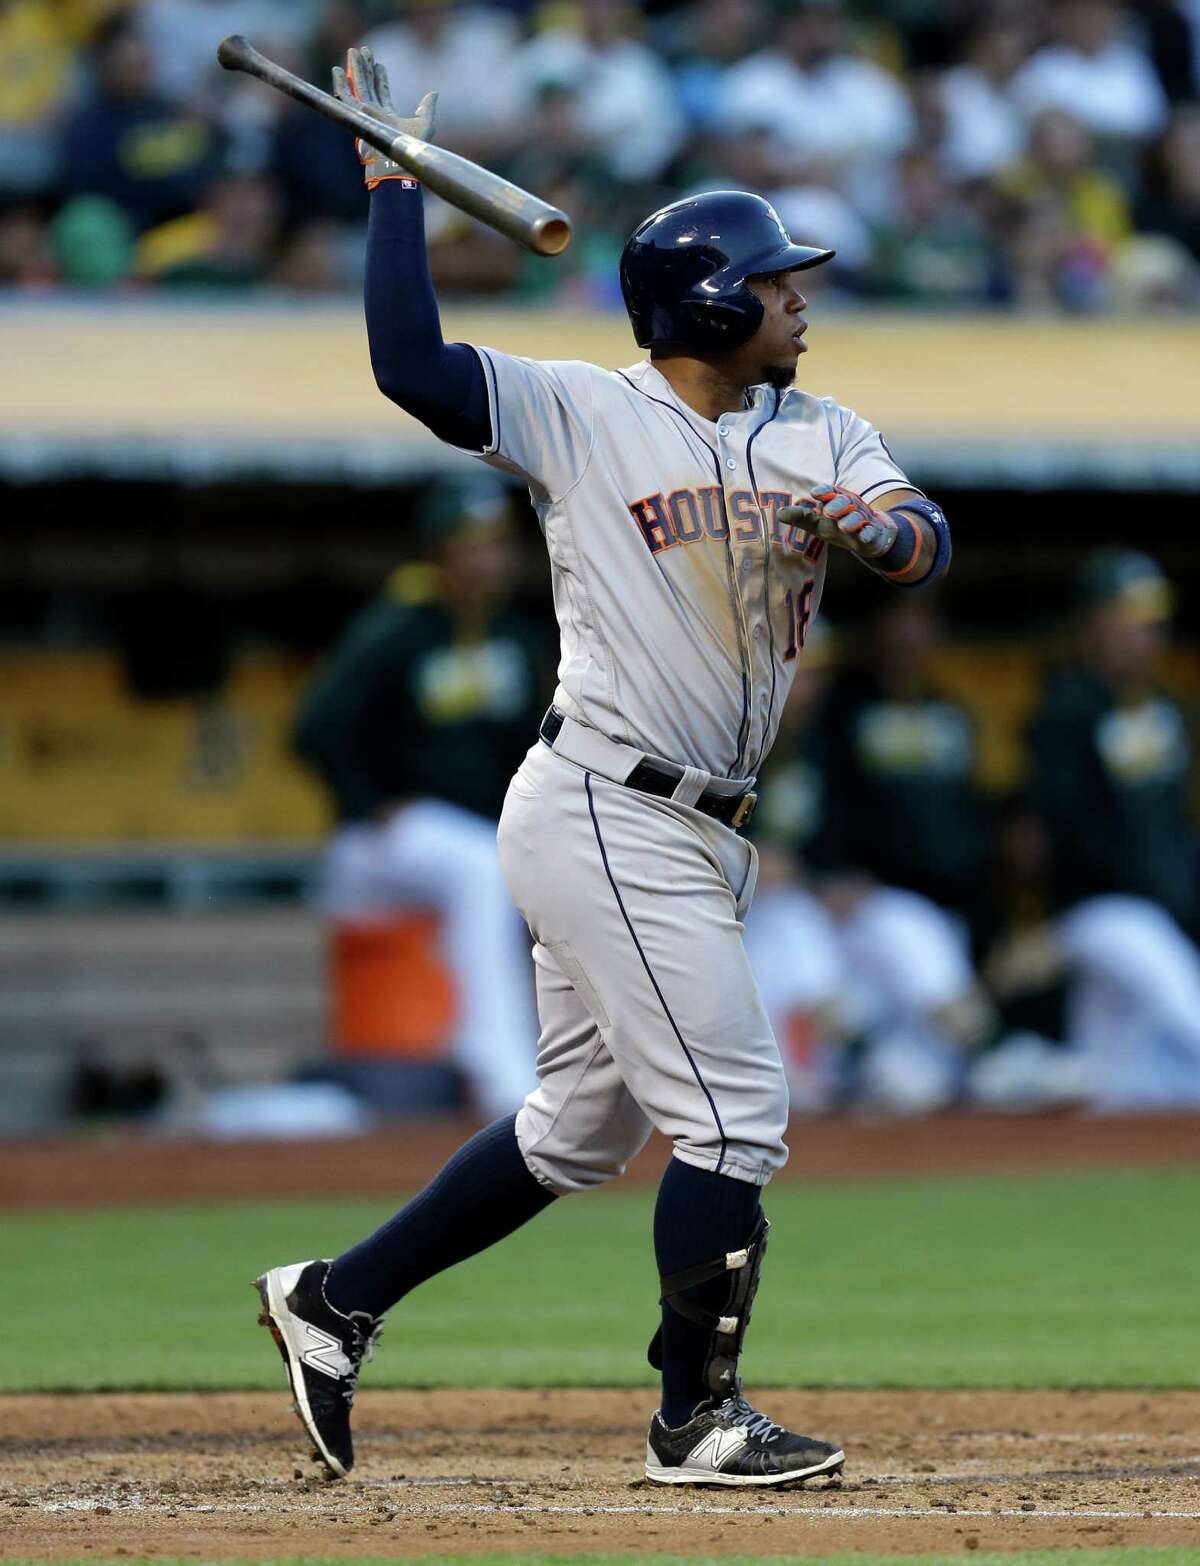 Houston Astros' Luis Valbuena tosses his bat after hitting an RBI single off Oakland Athletics' Dillon Overton in the third inning of a baseball game Tuesday, July 19, 2016, in Oakland, Calif. (AP Photo/Ben Margot)